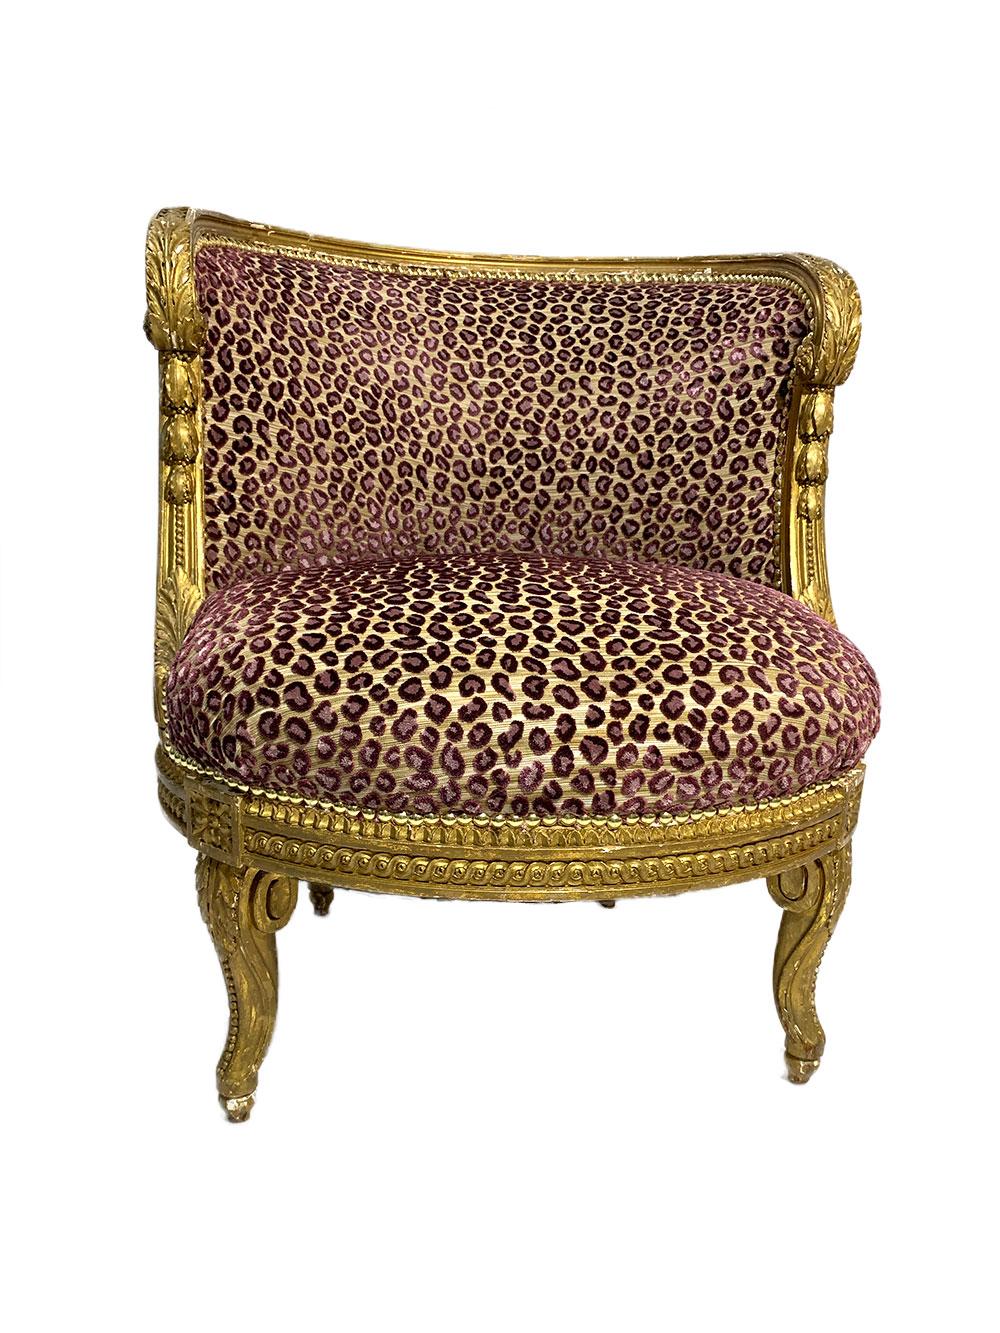 Early 20th century petite antique carved Louis XV style giltwood boudoir chair reupholstered in designer Wilde Safari purple and lavender cut velvet cheetah fabric by Colefax and Fowler framed in an authentic 100 year old distressed giltwood frame